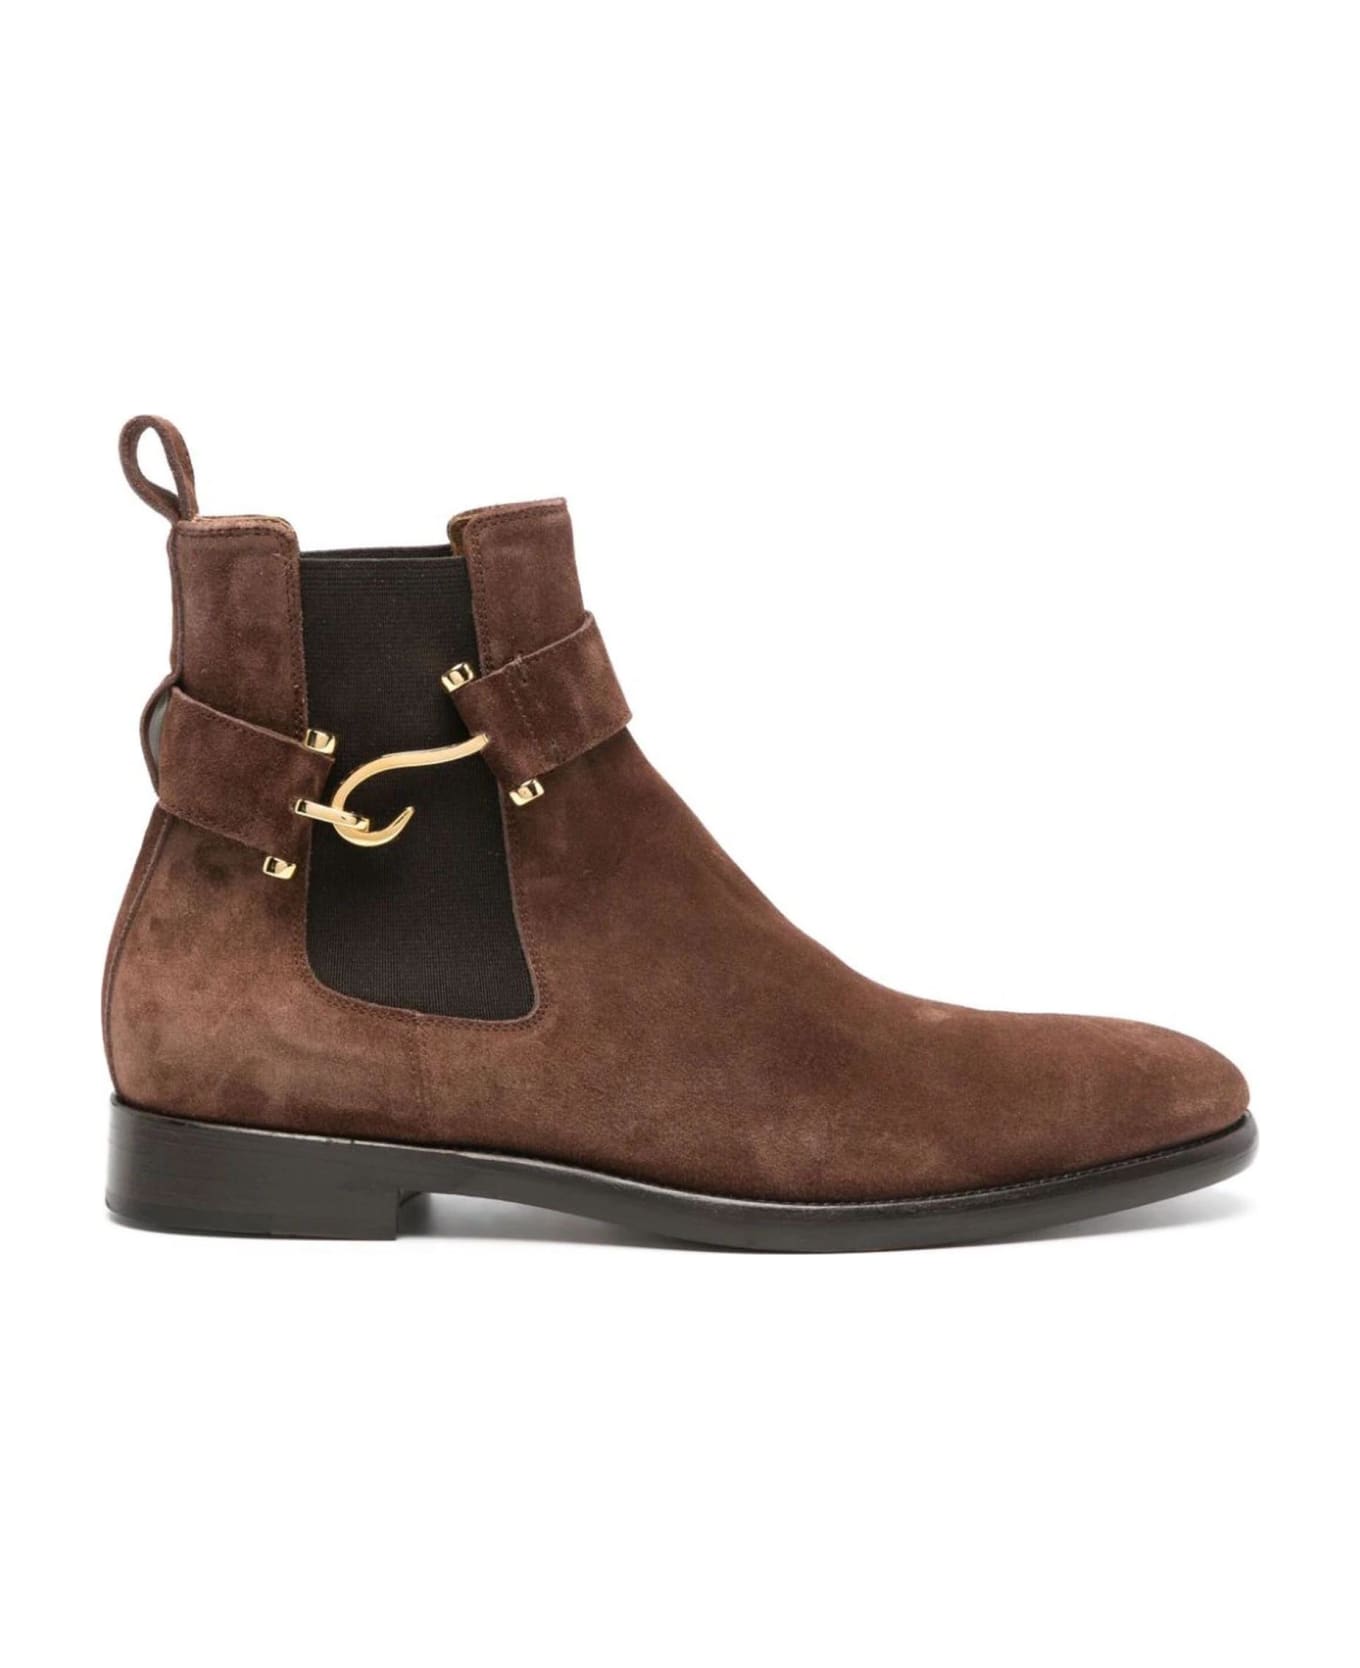 Edhen Milano Brown Suede Ankle Boots - Marrone